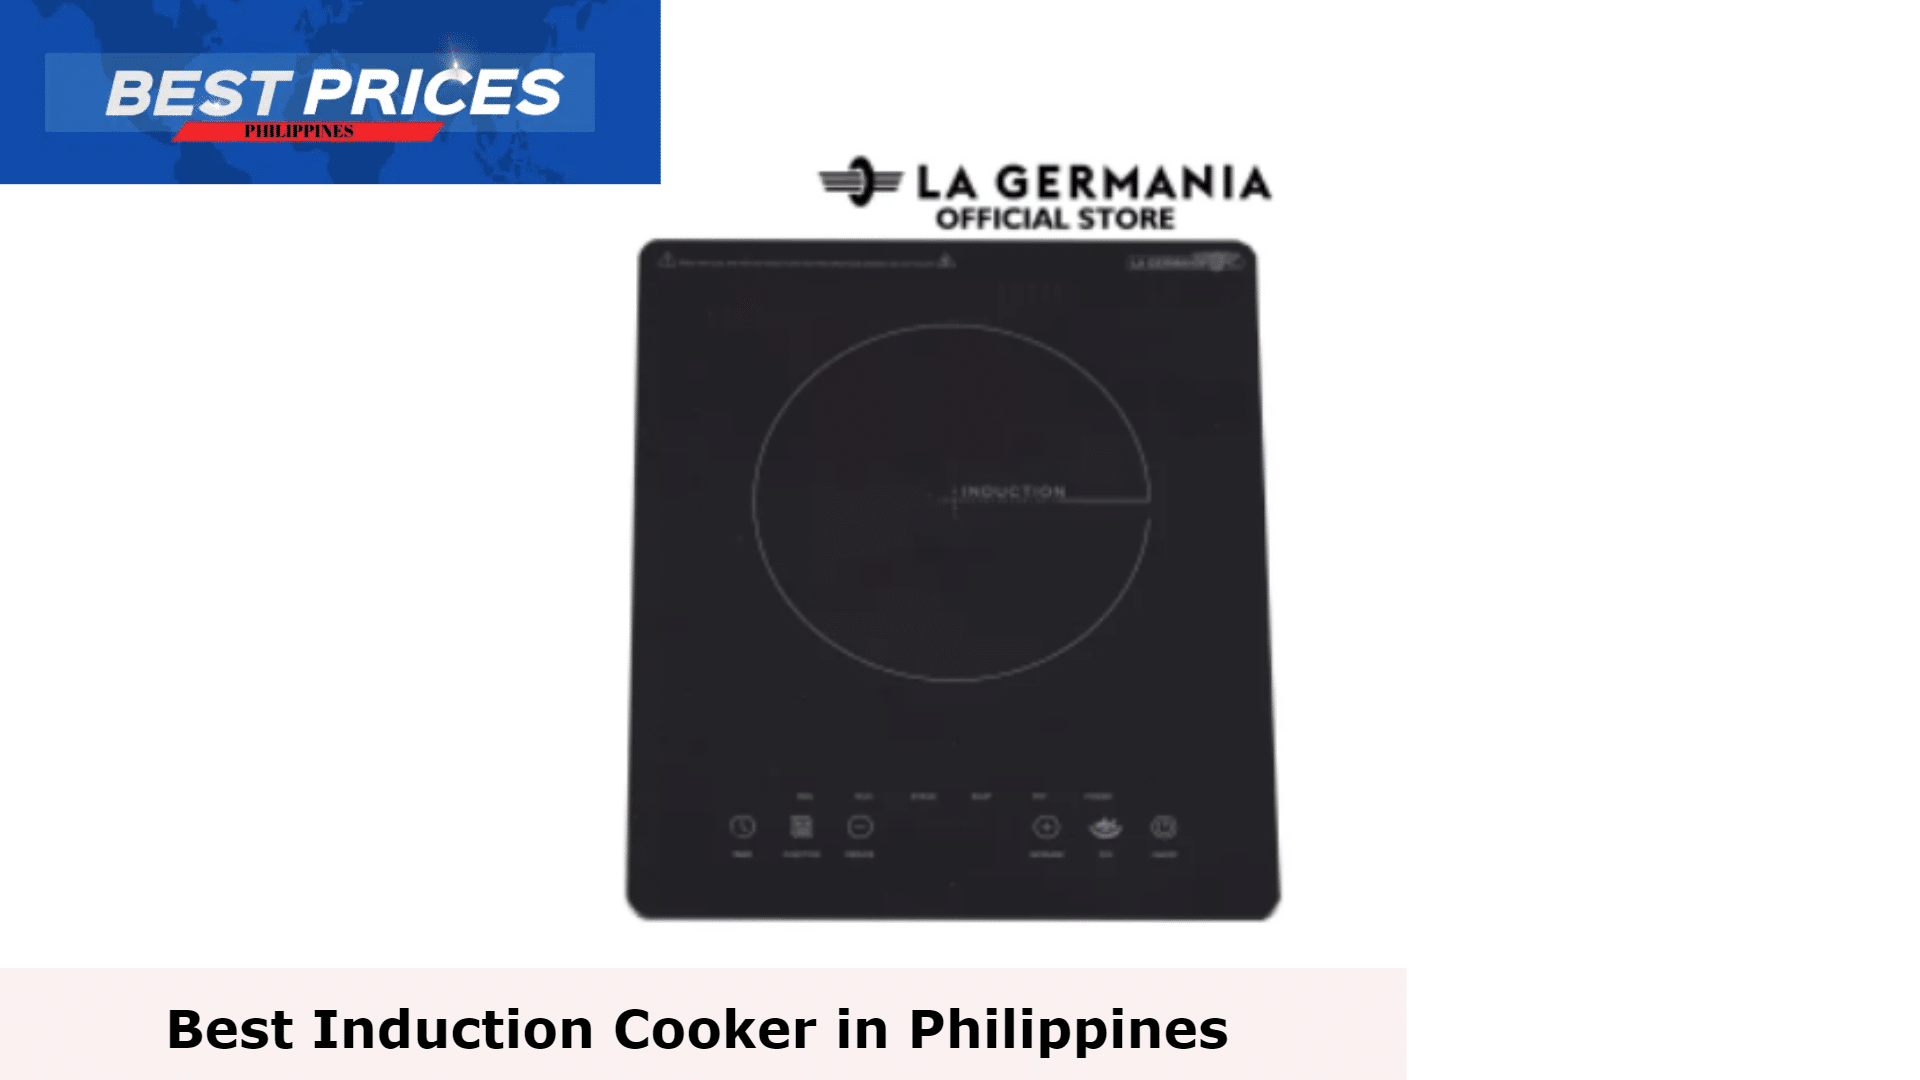 La Germania PH-301IS-H Induction Cooker - Best Induction Cooker in Philippines, Induction Cooker Philippines, Is induction cooker better than gas?, are induction cookers worth it?, Can we use regular cooker on induction?, Which is better induction or electric stove?, Best Induction Cookers in Philippines, induction cooker Philippines, induction cooker portable, induction cooker price Philippines, best induction cooker Philippines, induction cooker brand, induction cooker review, induction cooker Philippines review, What is the best induction cooktop Philippines?, Which is best induction cooker brand?, Is induction cheaper than gas in Philippines?, Which induction is best for home?, Best Induction Cookers Price List in Philippines,